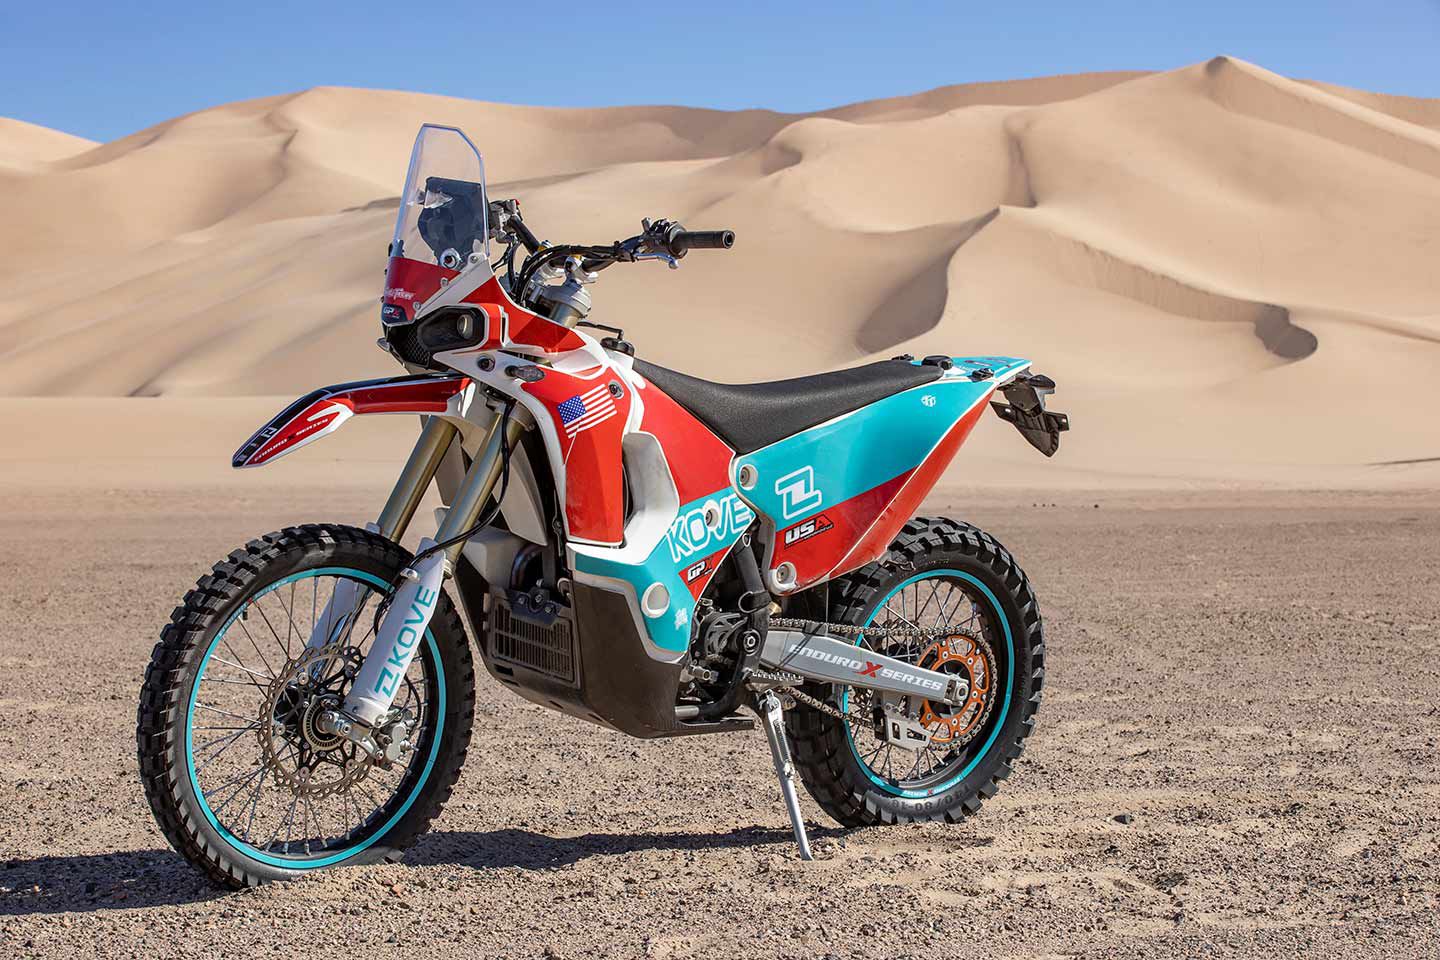 Motorcyclists seeking a true rally bike at an affordable price will appreciate the $8,999 2023 Kove Moto FSE 450R Rally.